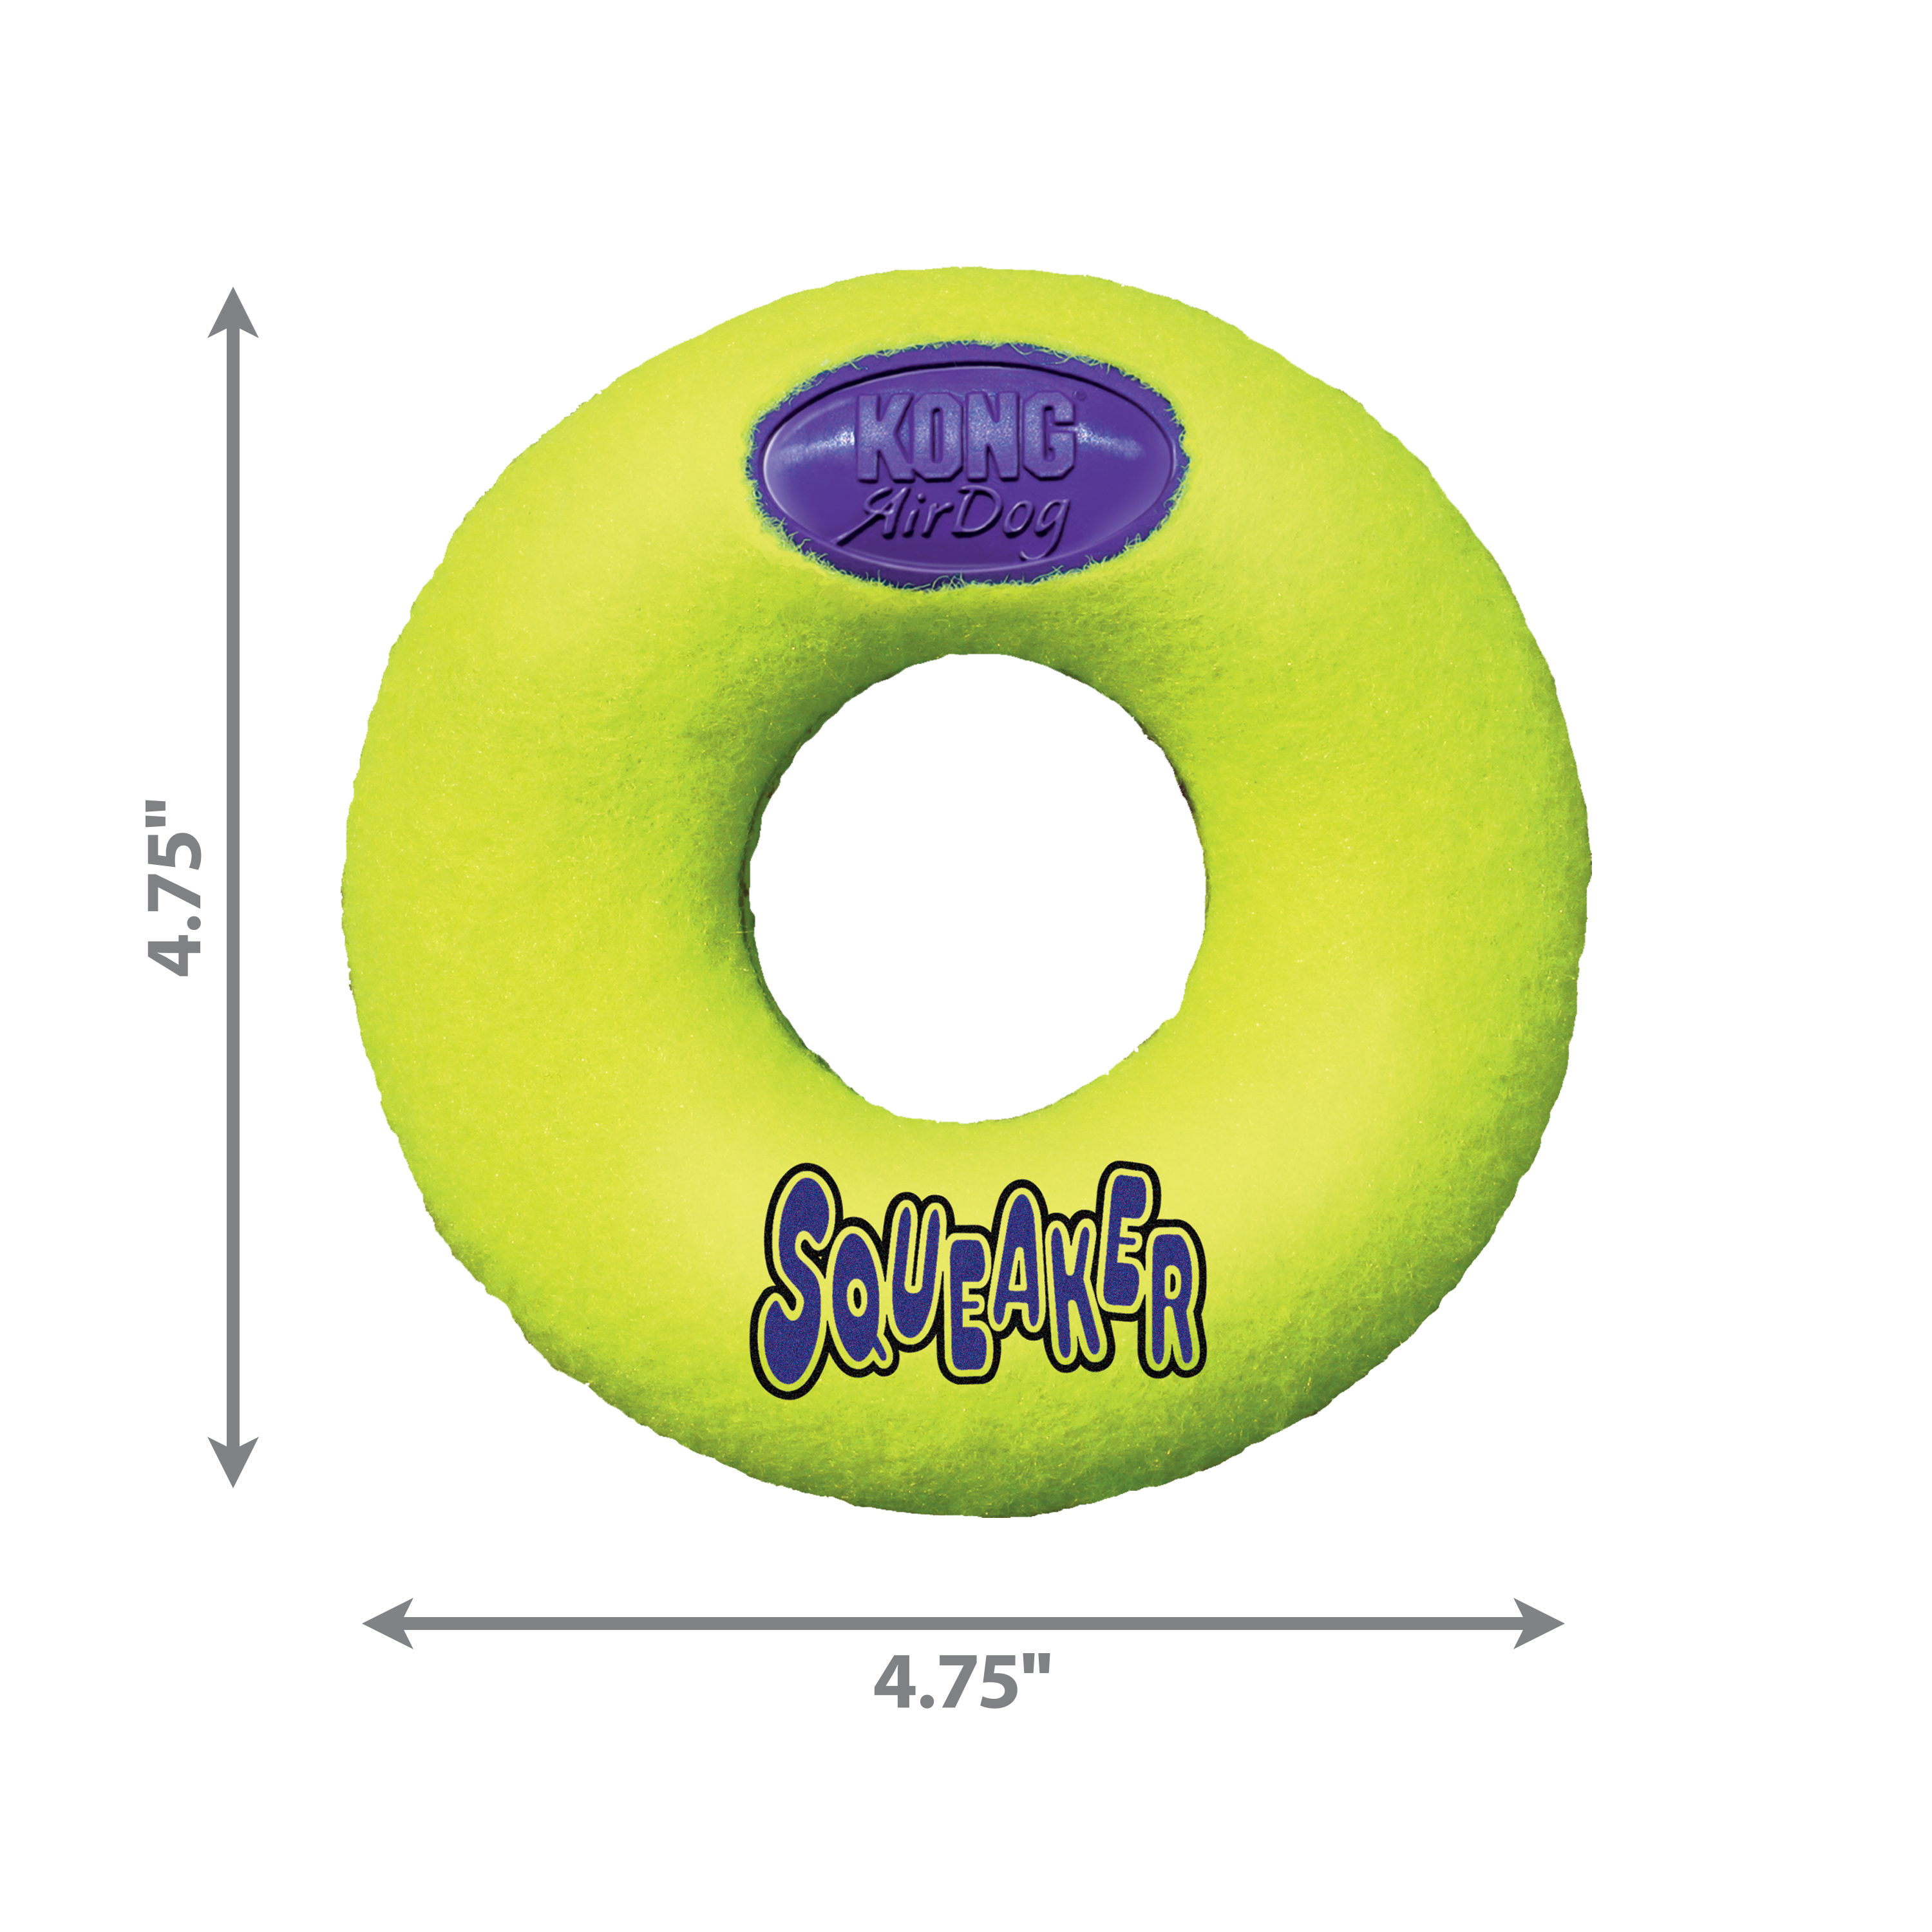 AirDog Donut dimoffpack product image